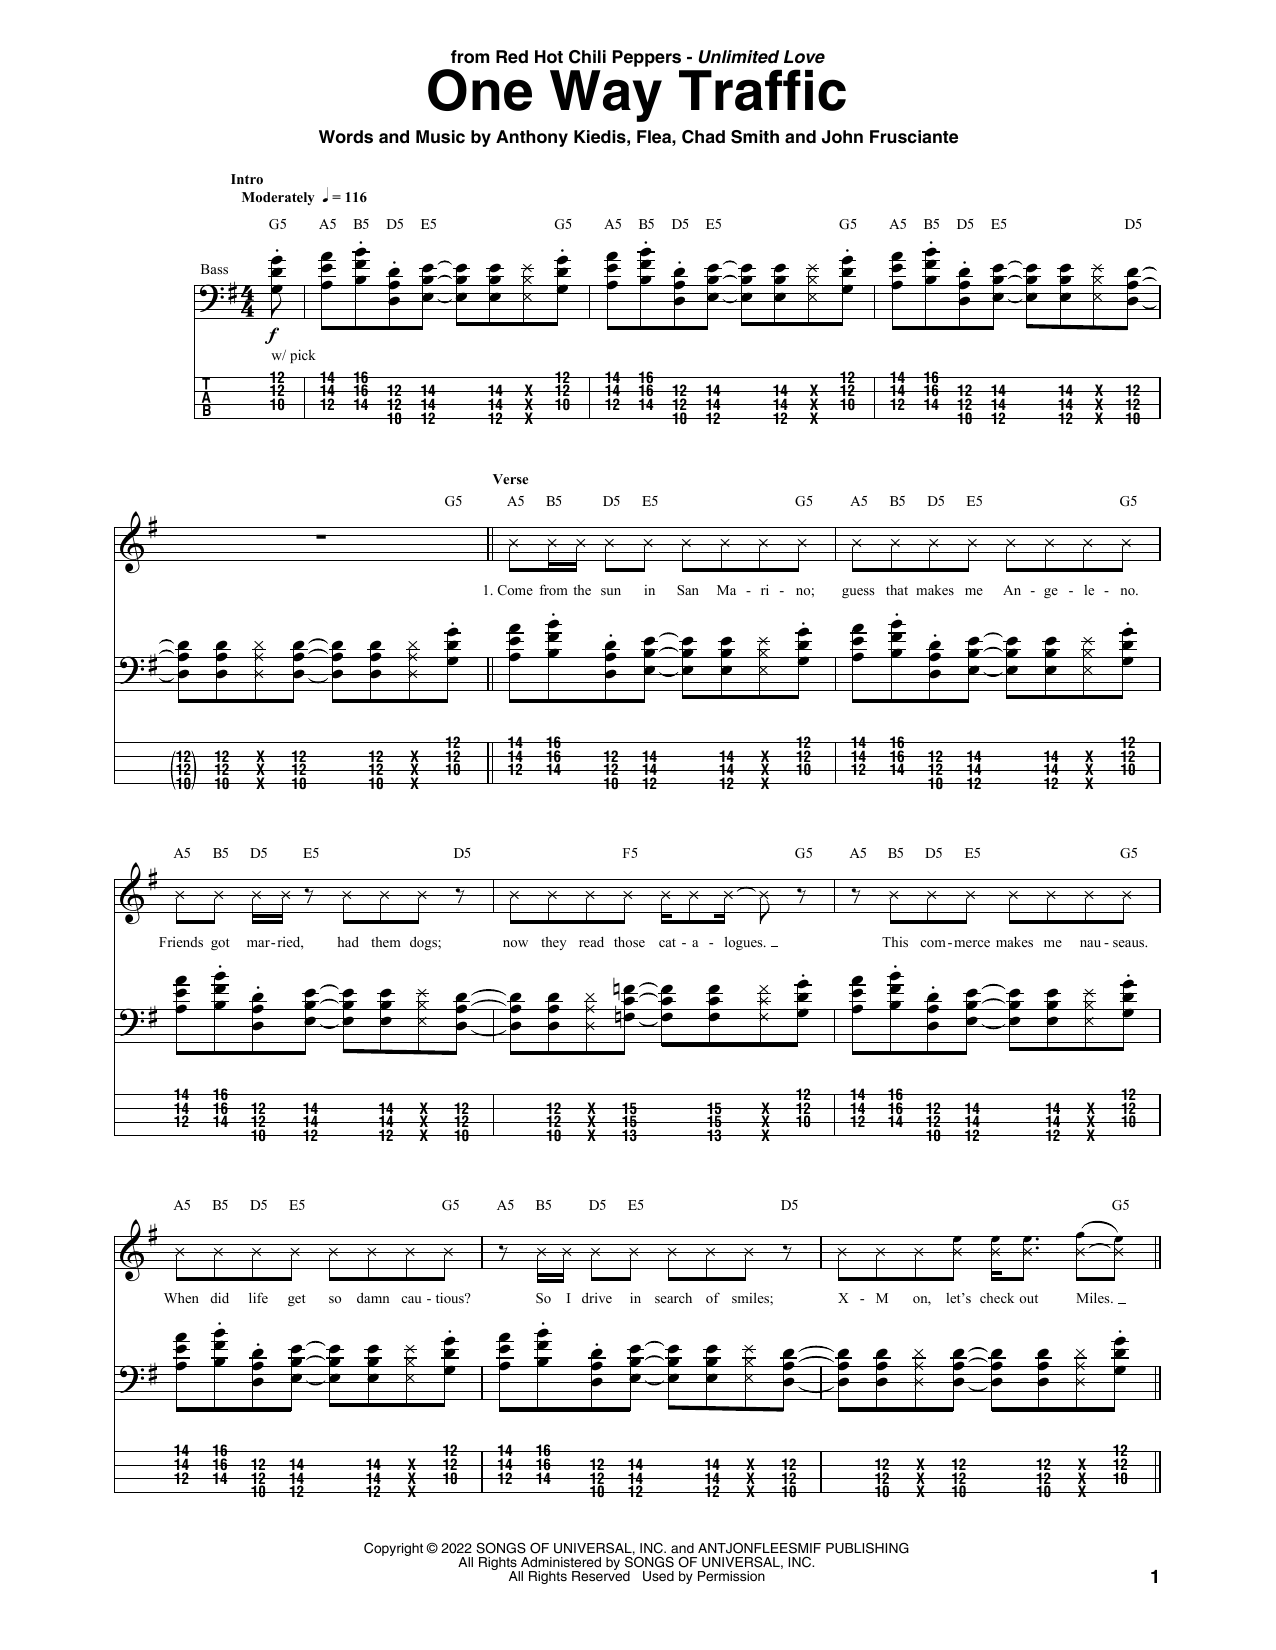 Download Red Hot Chili Peppers One Way Traffic Sheet Music